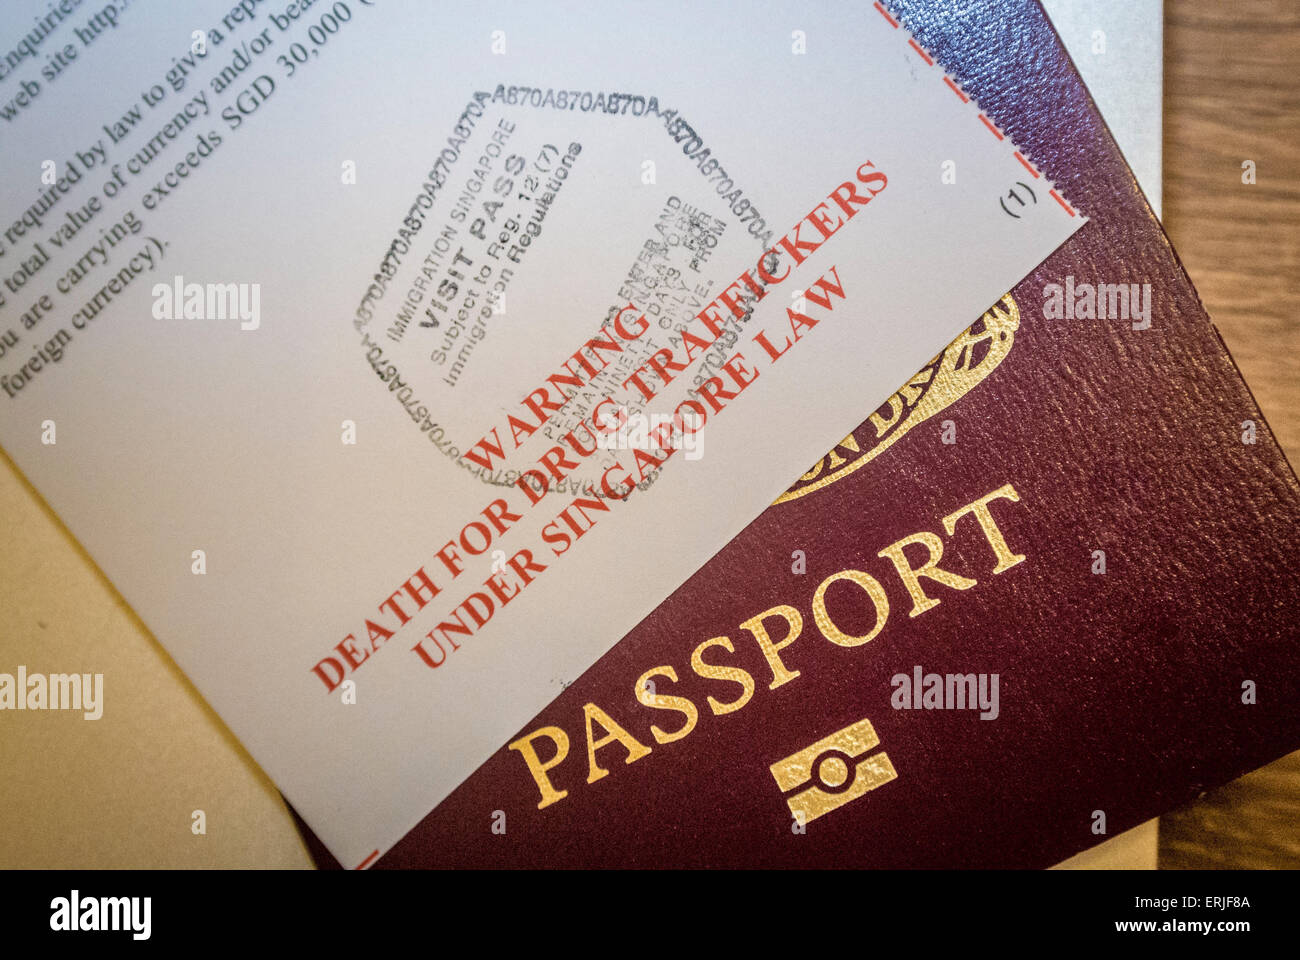 Warning to drug traffickers sign on immigration documents with European passport - Singapore Stock Photo